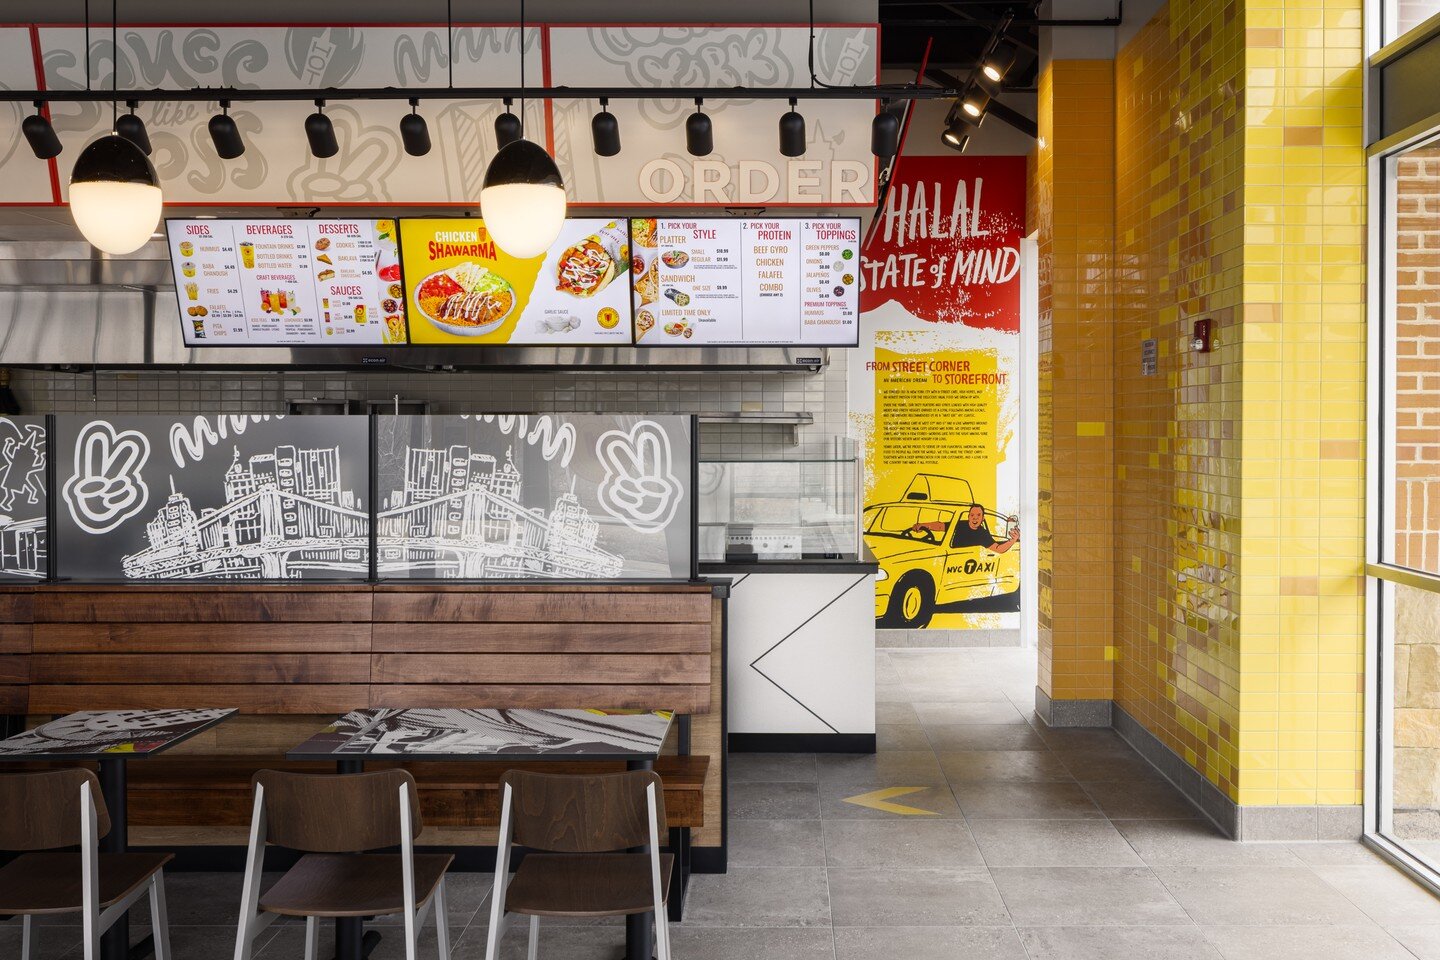 Go check out The Halal Guys in Kansas City today for their Grand Opening. We've enjoyed working on their space and are excited to try their delicious food! 

📷: @natesheetsphoto